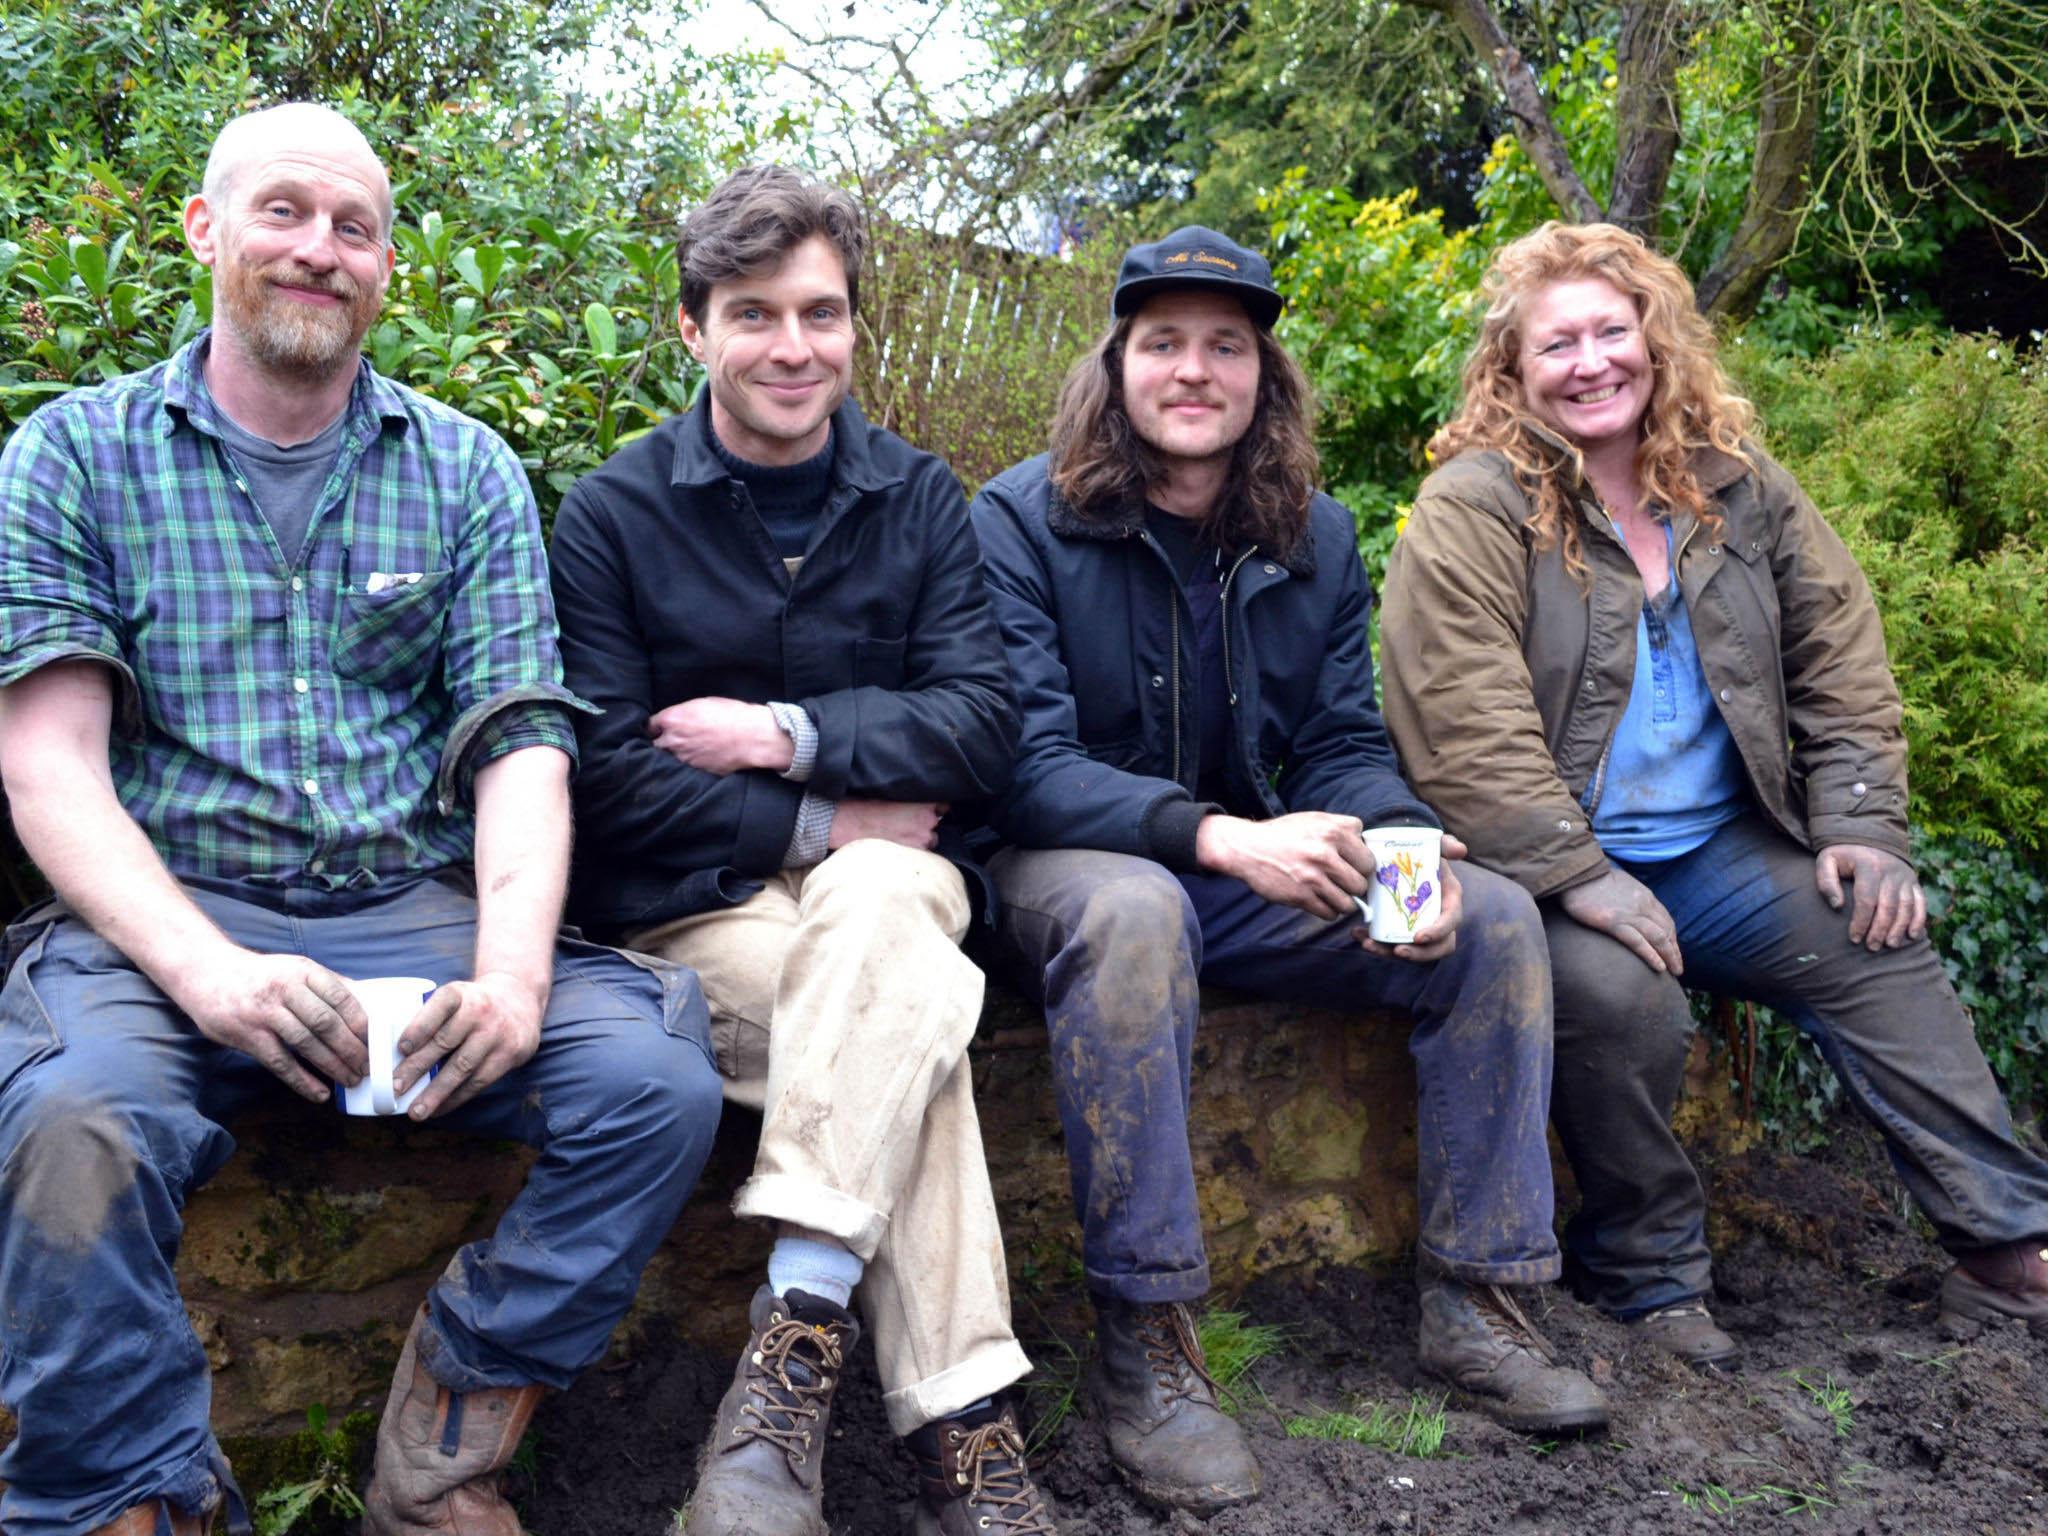 Charlie Dimmock (right) returns with a new team and new gardening challenges